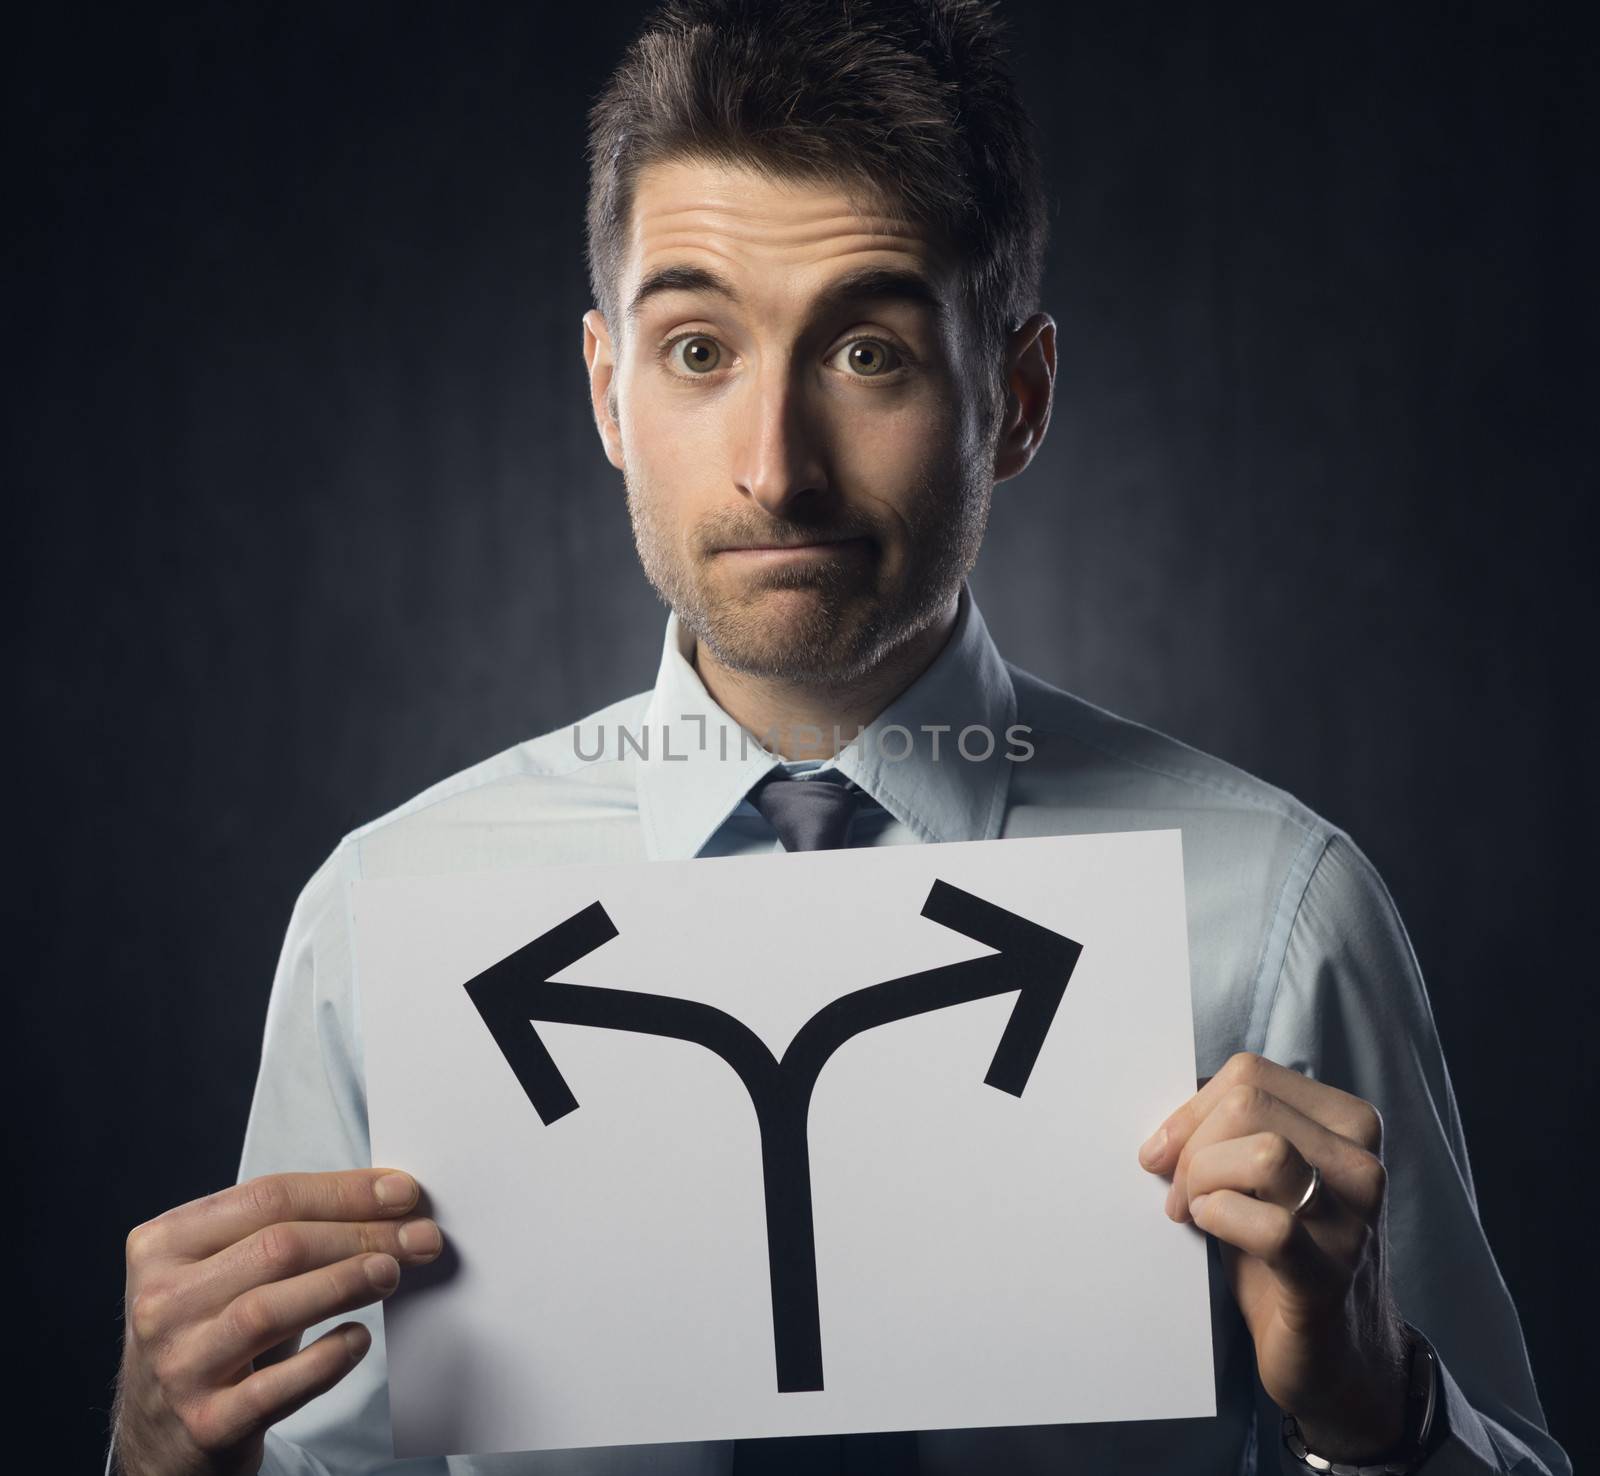 Man holding a sign with directions and pensive expression.